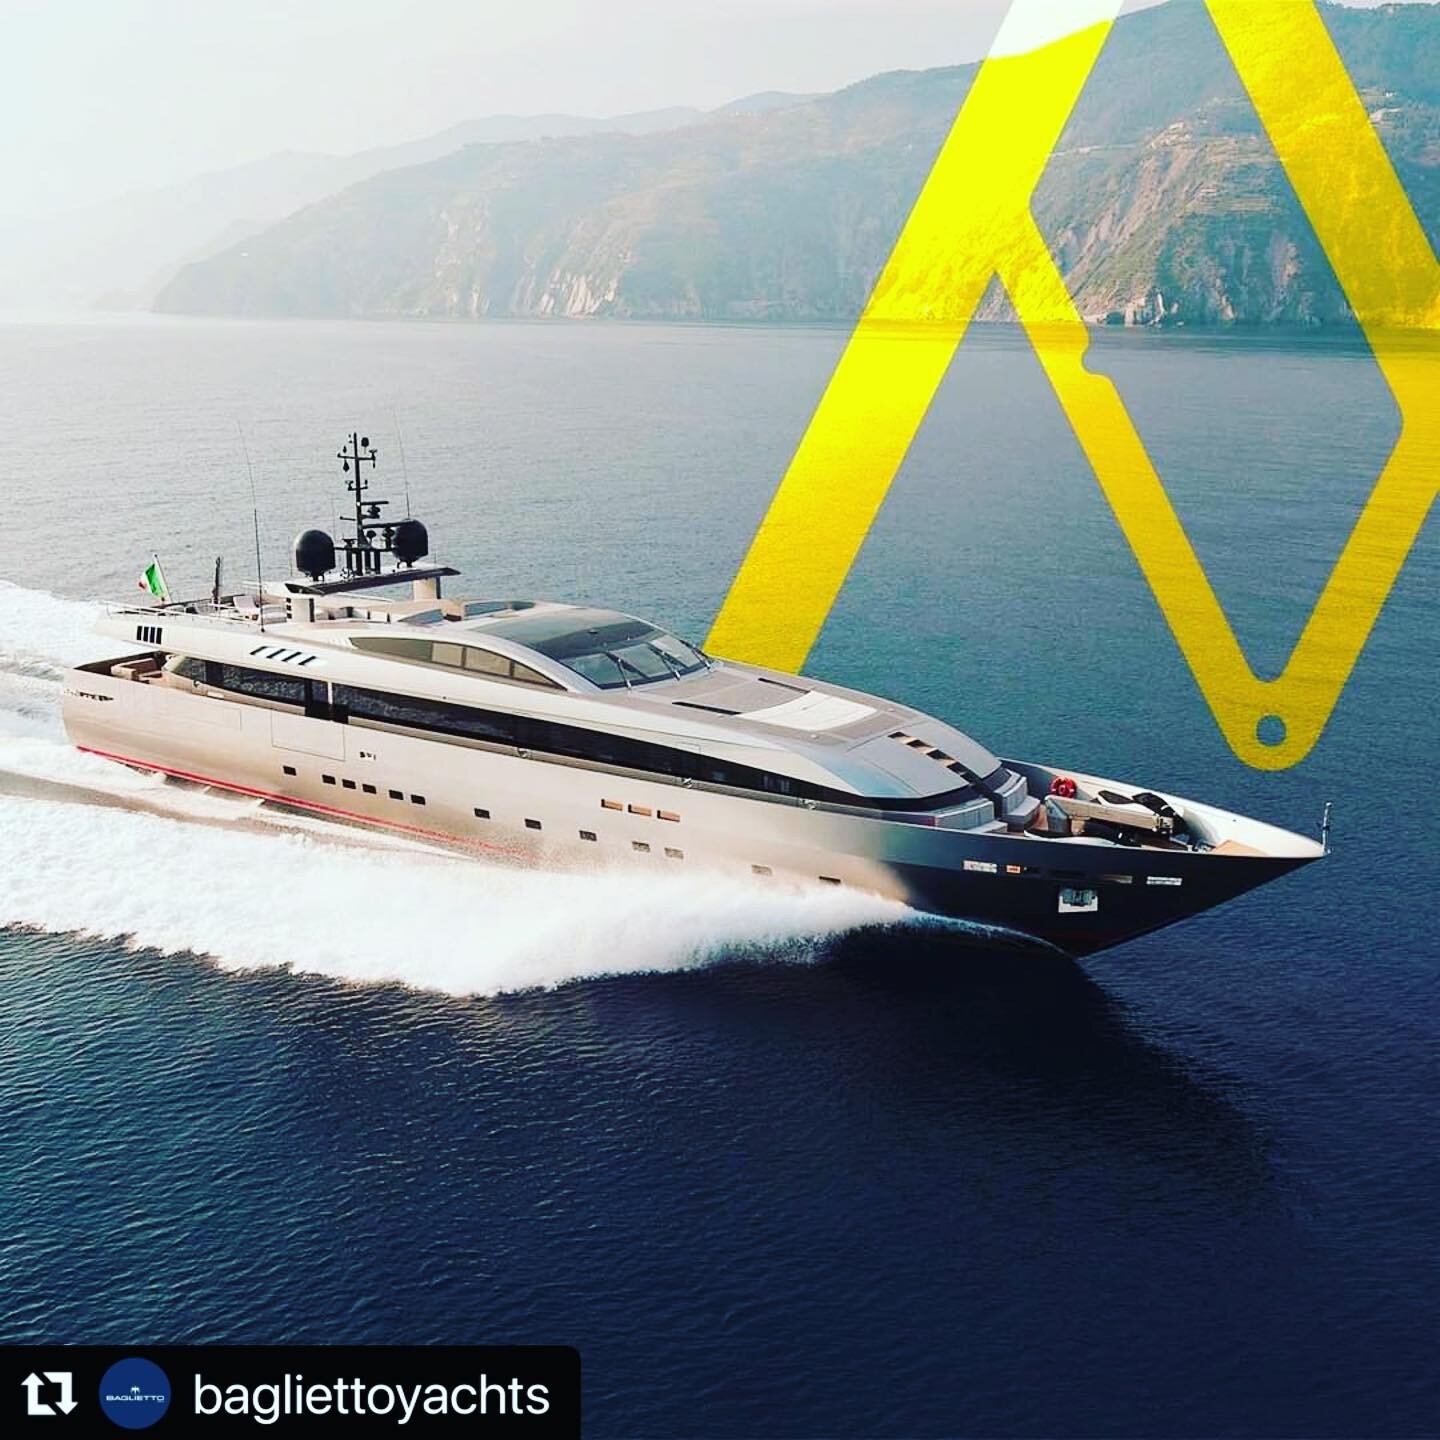 #Repost @bagliettoyachts with @make_repost
・・・
A tailored design for the owner who wants the utmost comfort. Like the elegant and essential craft created for the Monokini, the 44m Fast Line, with sleek, refined colour shades inspired by aviation desi